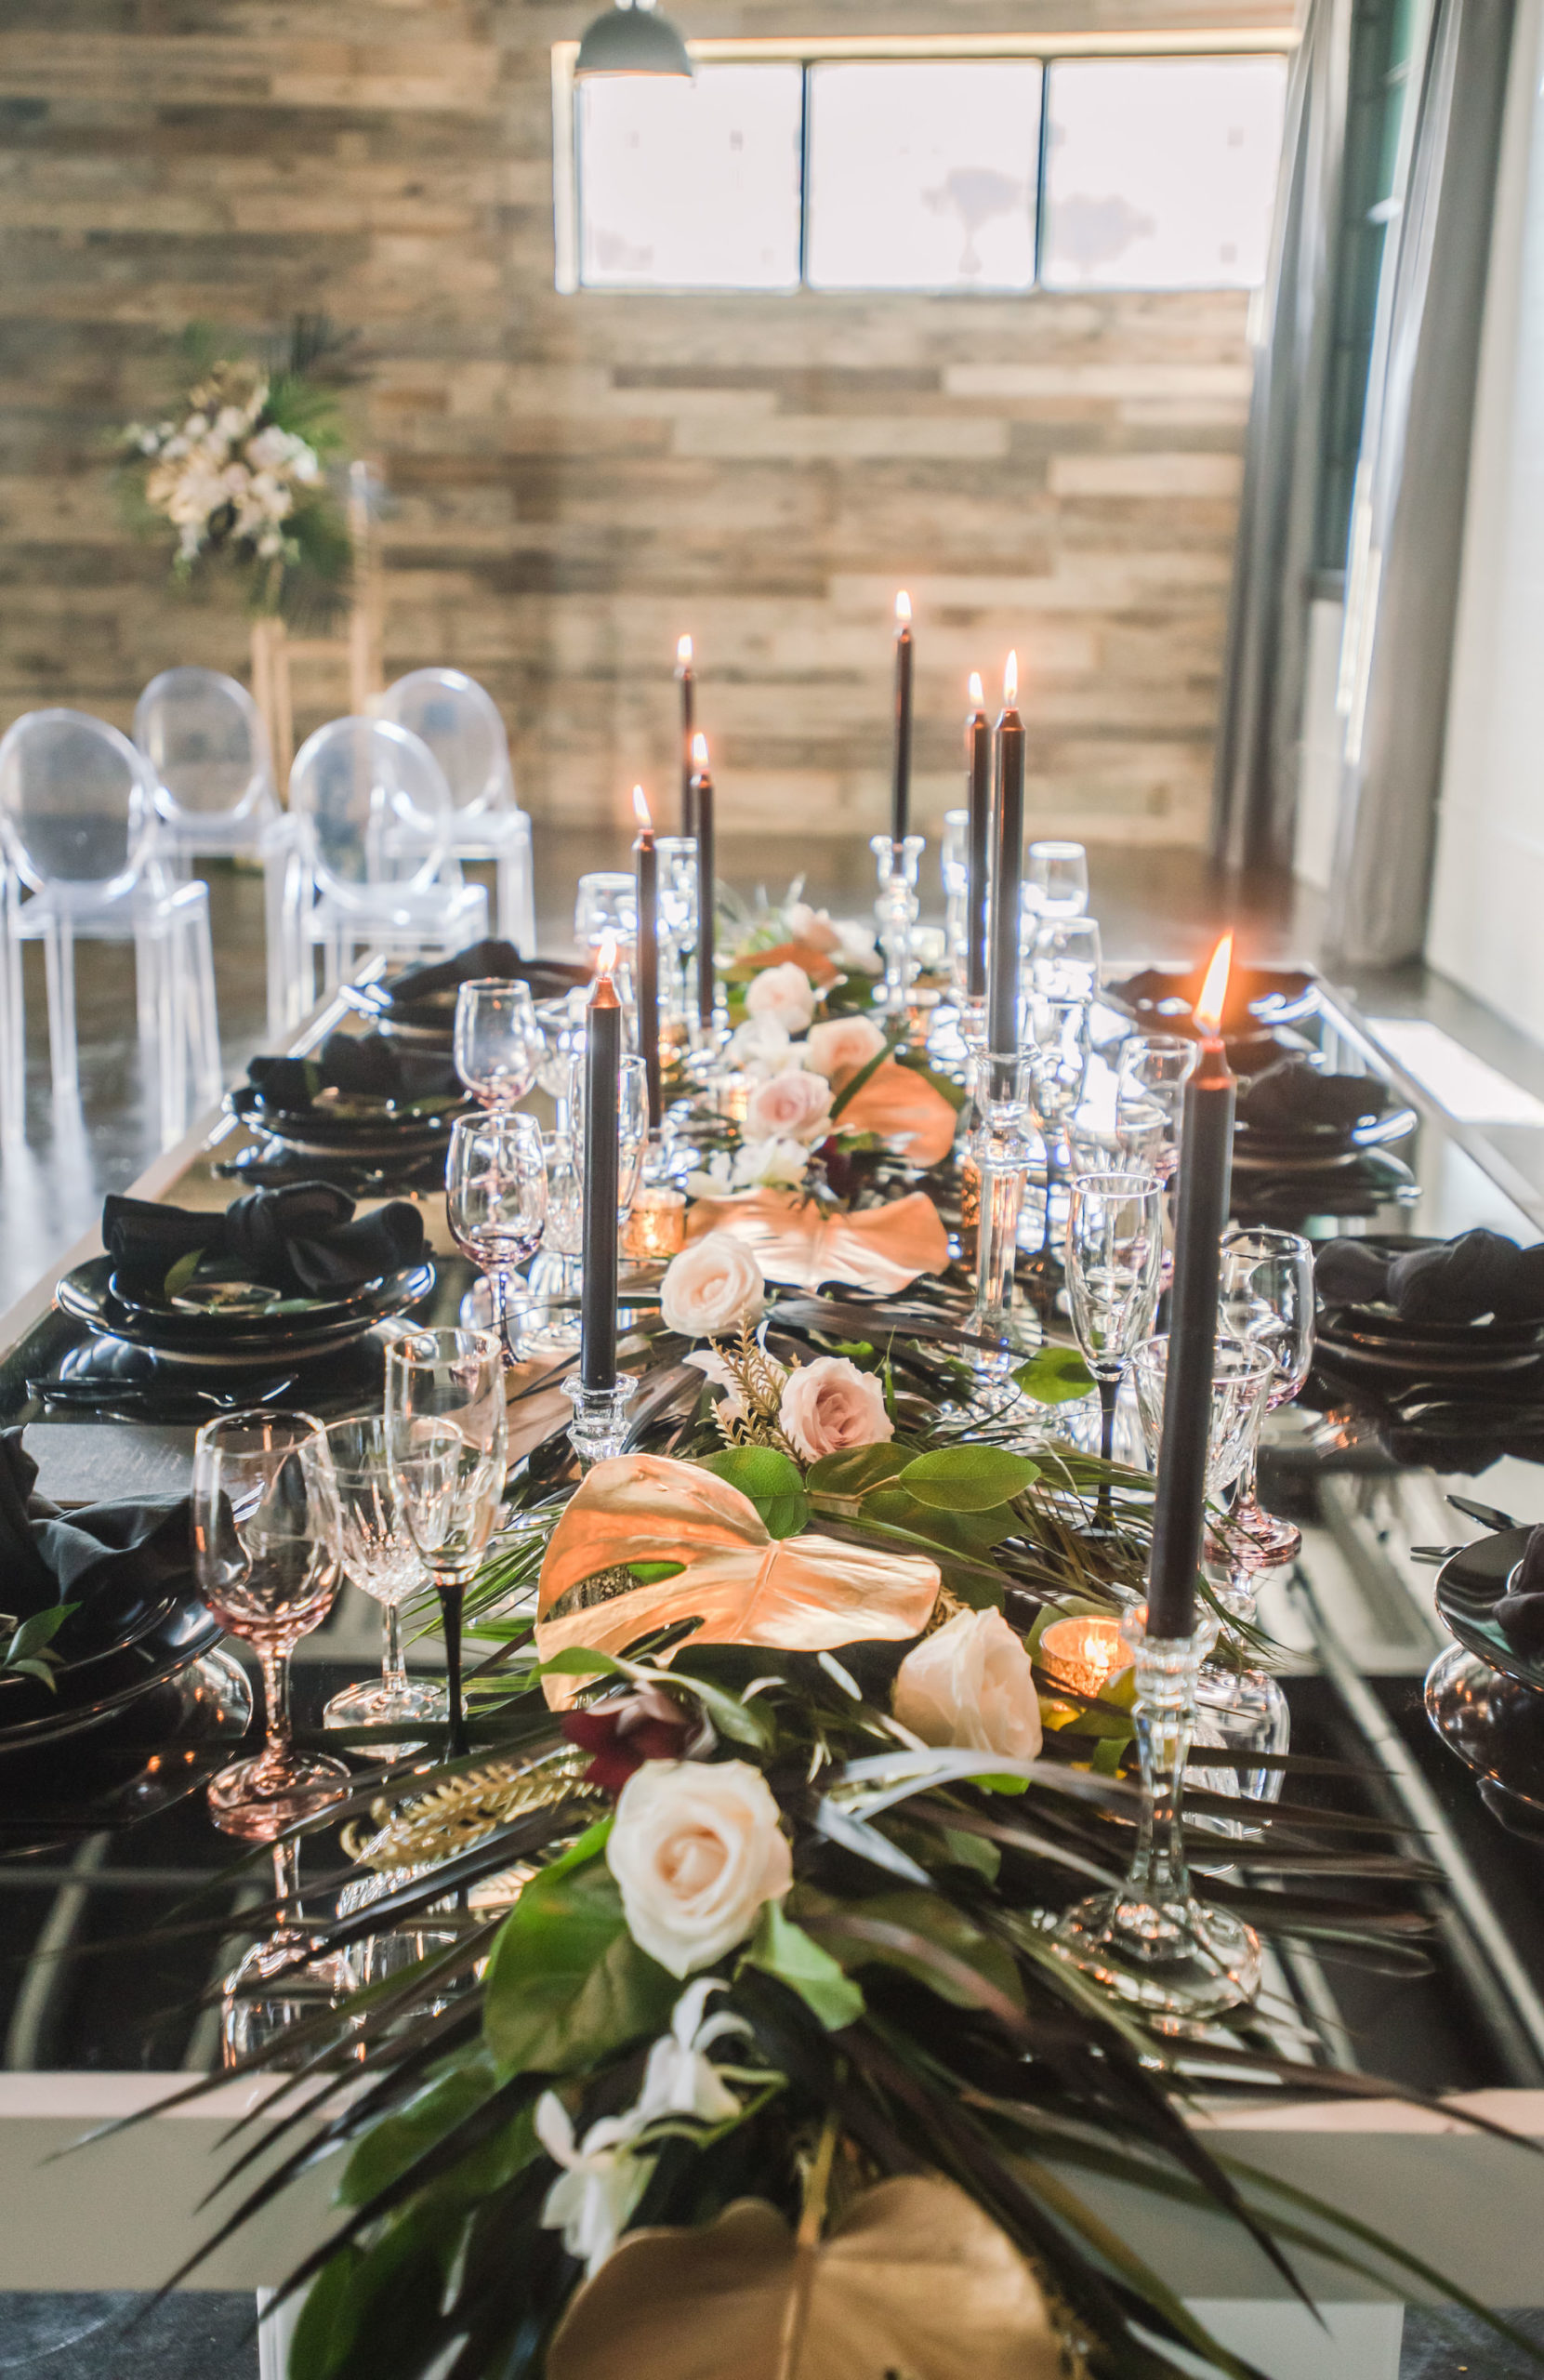 Dark Luxe, Romantic Wedding Reception Styled Shoot Decor, Long Table with Palm Fronds, Gold Painted Monstera Leaves, Blush Pink Roses Table Runner, Black Candlesticks and Tableware Plates | Tampa Bay Wedding Planner Elegant Affairs by Design